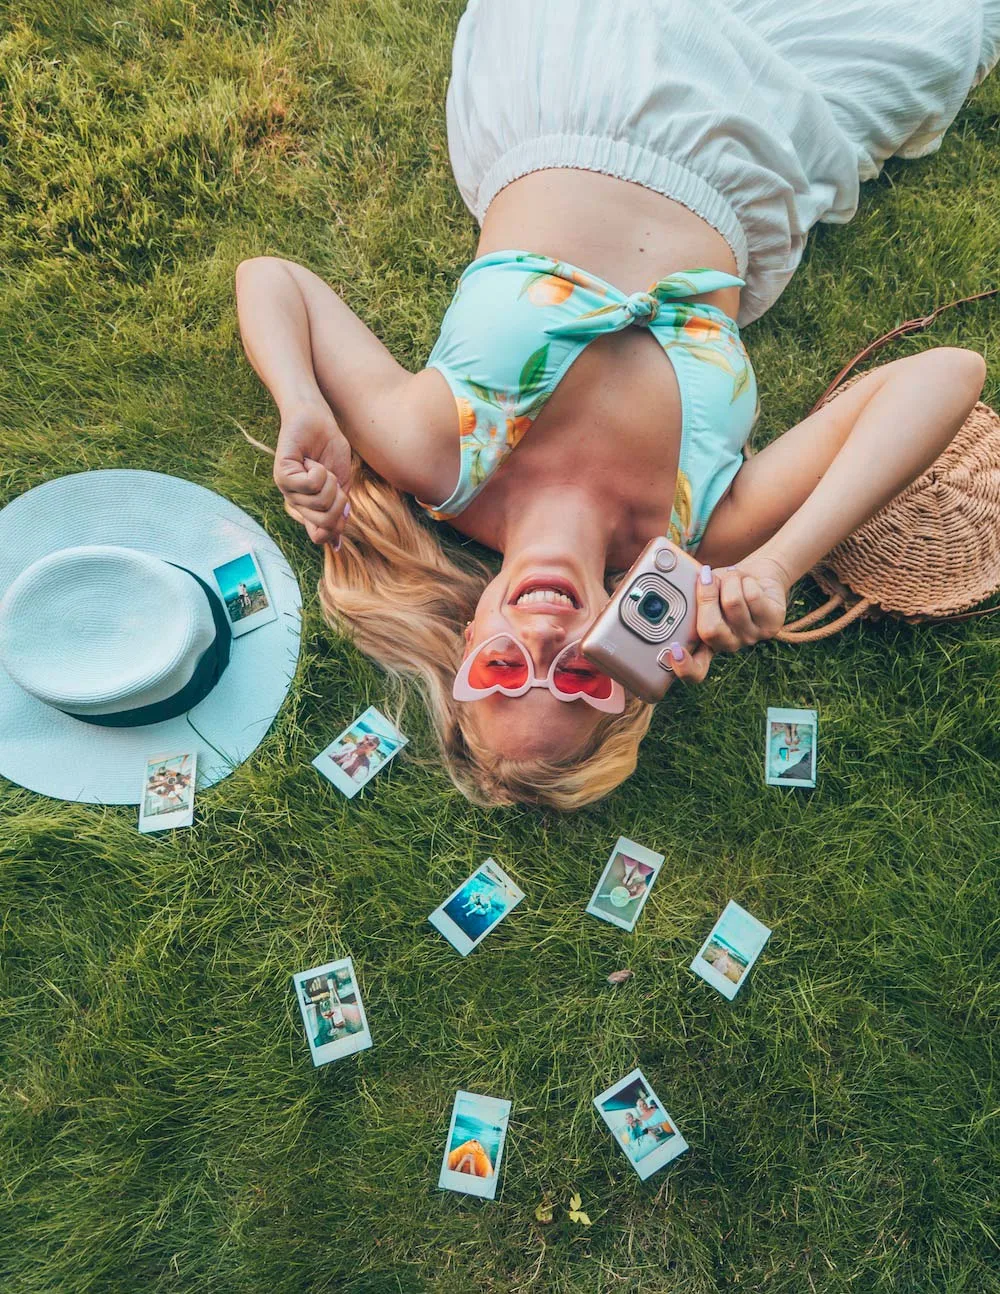 20 easy & creative outdoor photoshoot ideas to do in your own backyard inspired by our favourite instagrammers! Pictured here: Lay in the grass